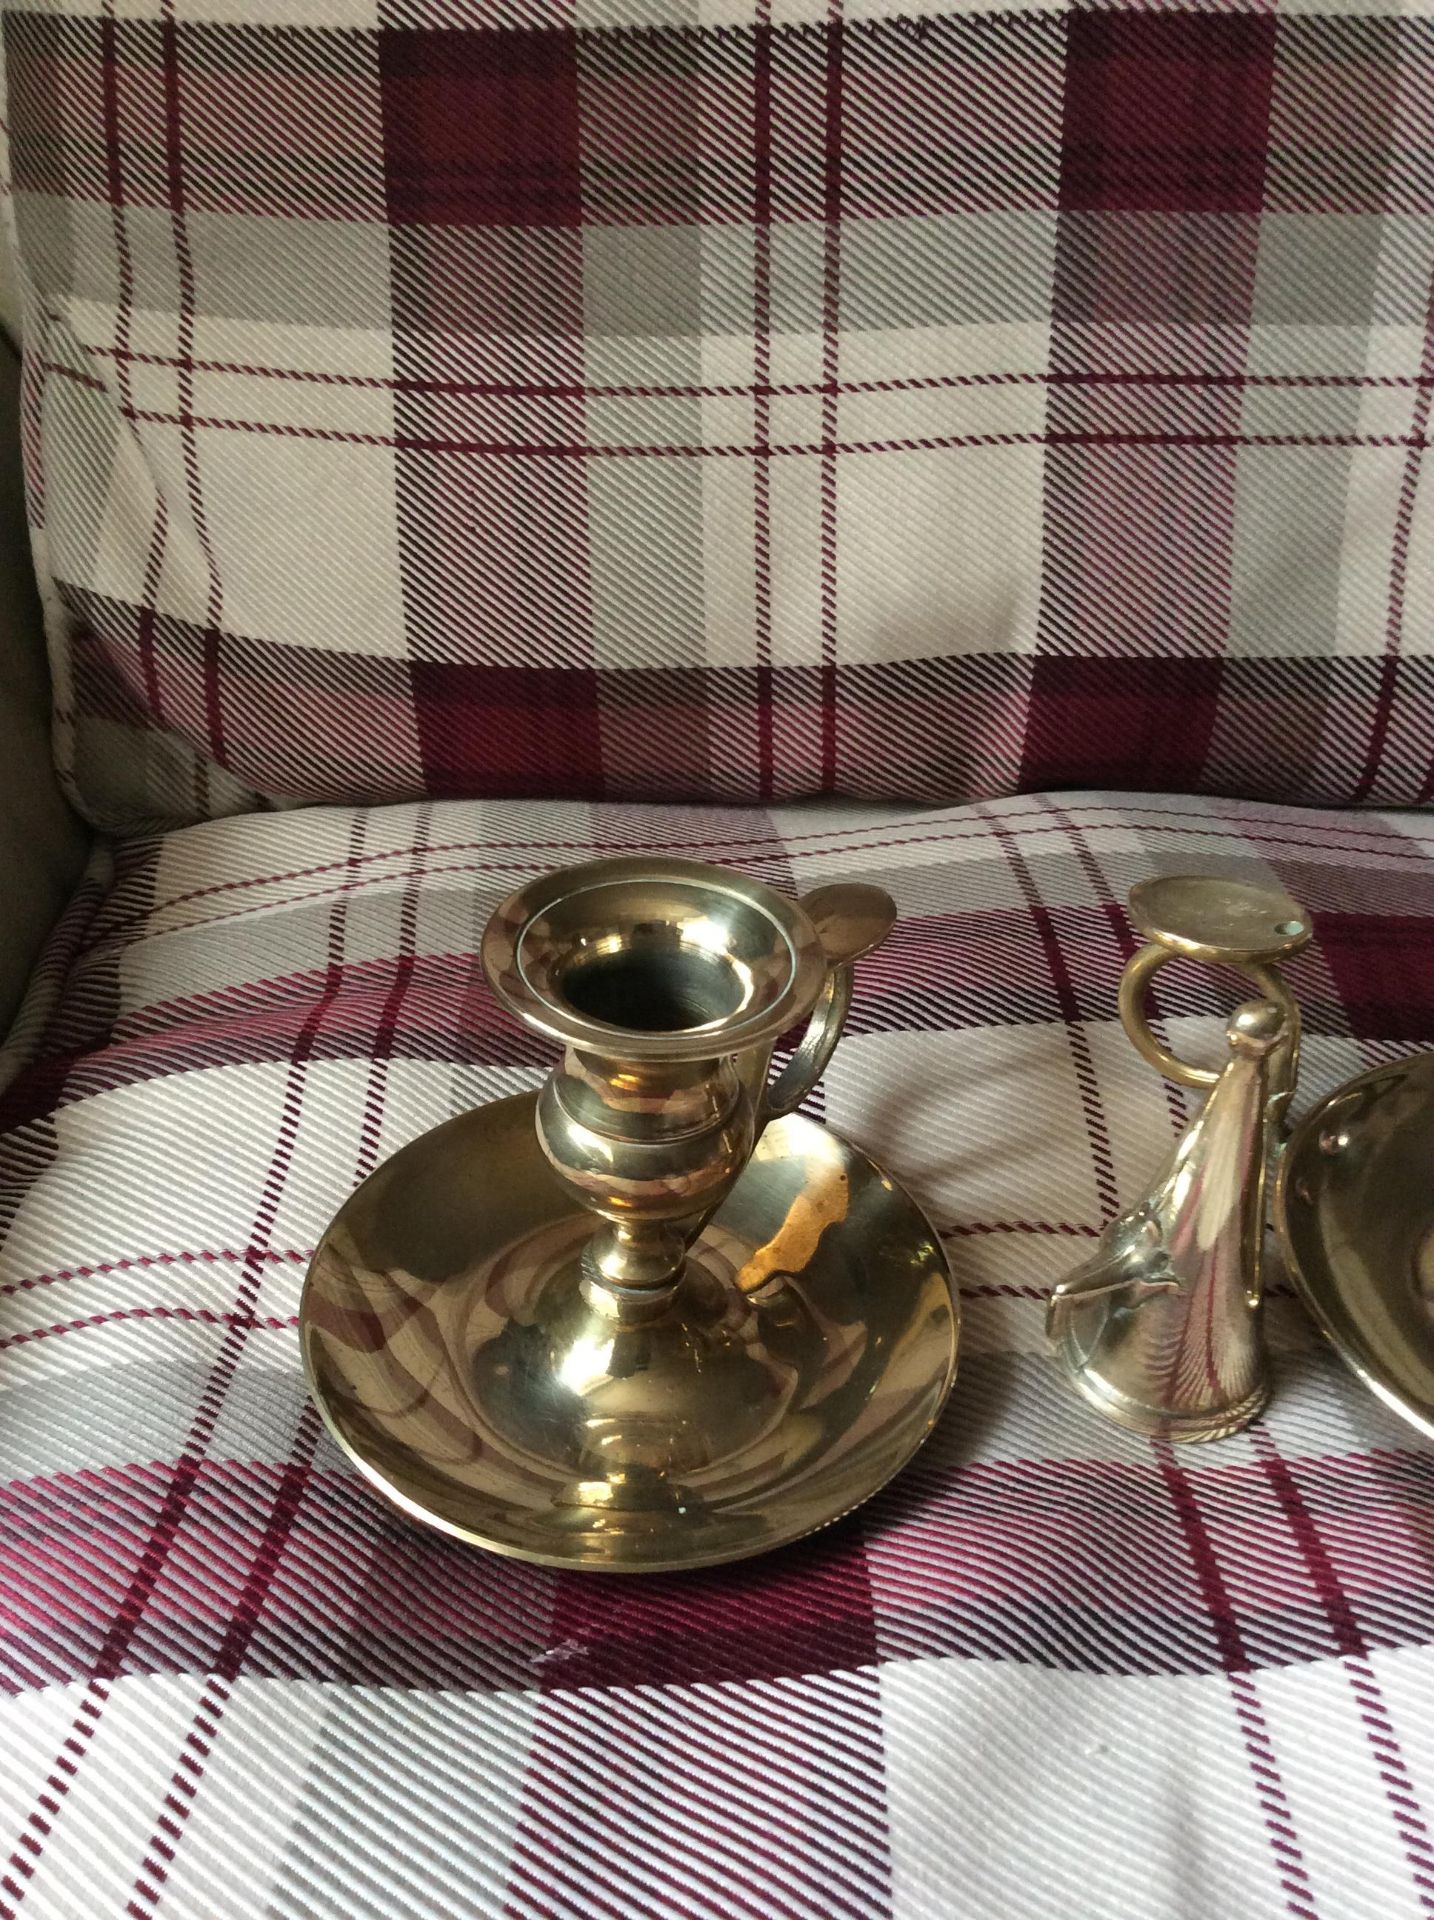 2 Vinage brass candlesticks one with ejector and snuffer - Image 3 of 7